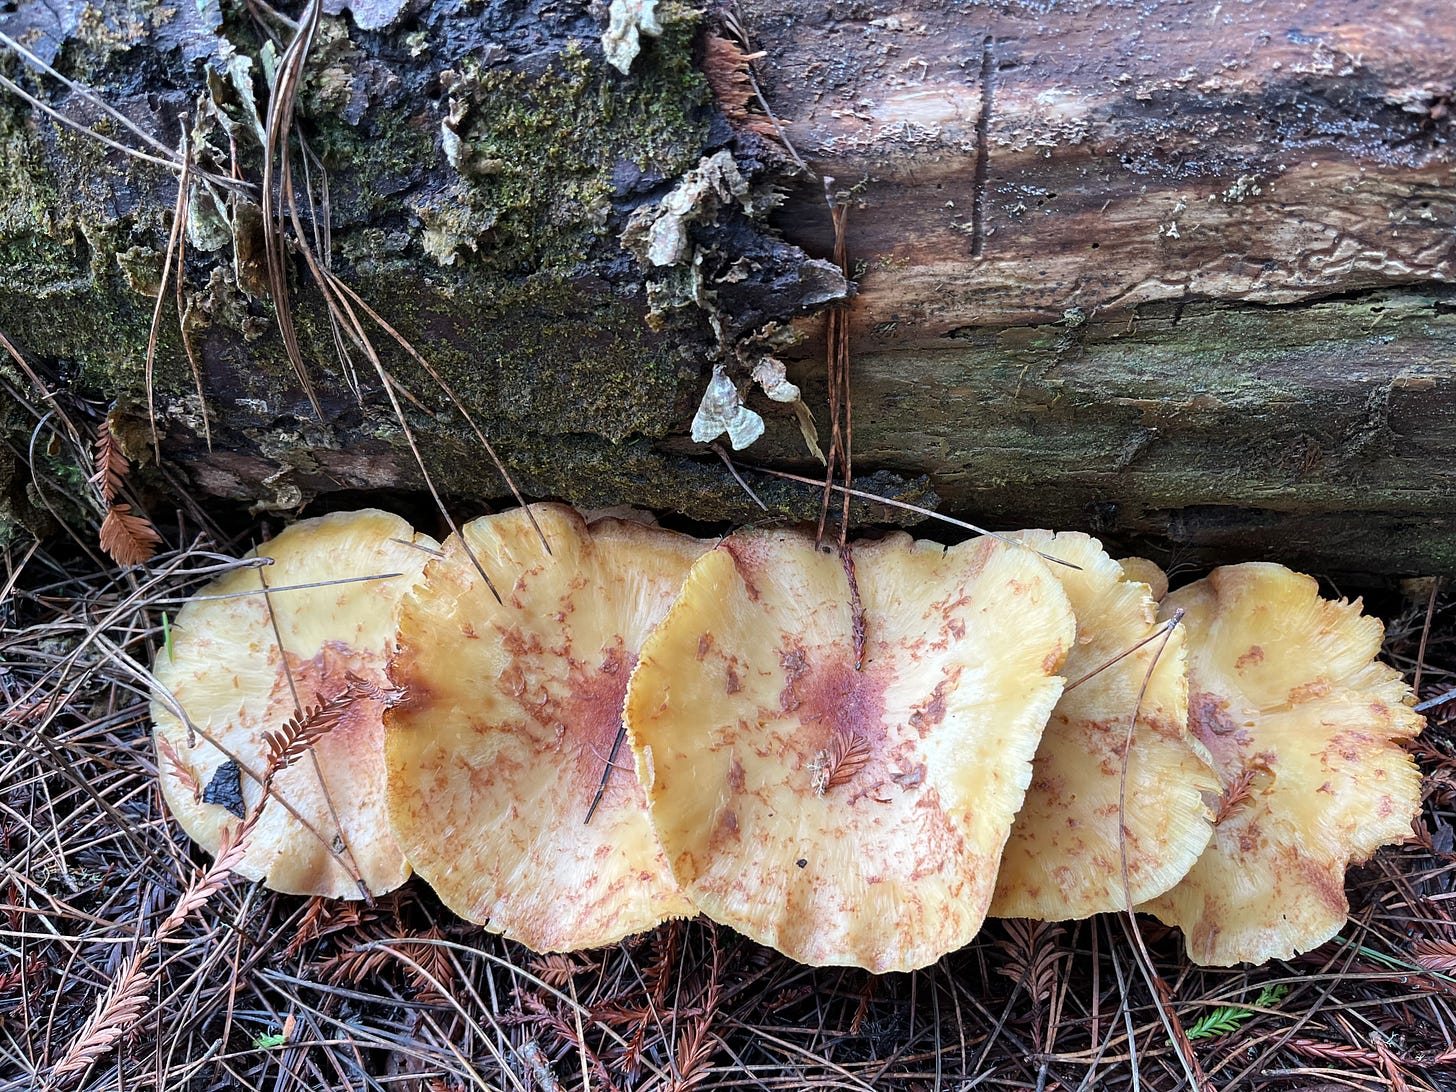 pale yellow row of mushrooms growing next to a pine trunk